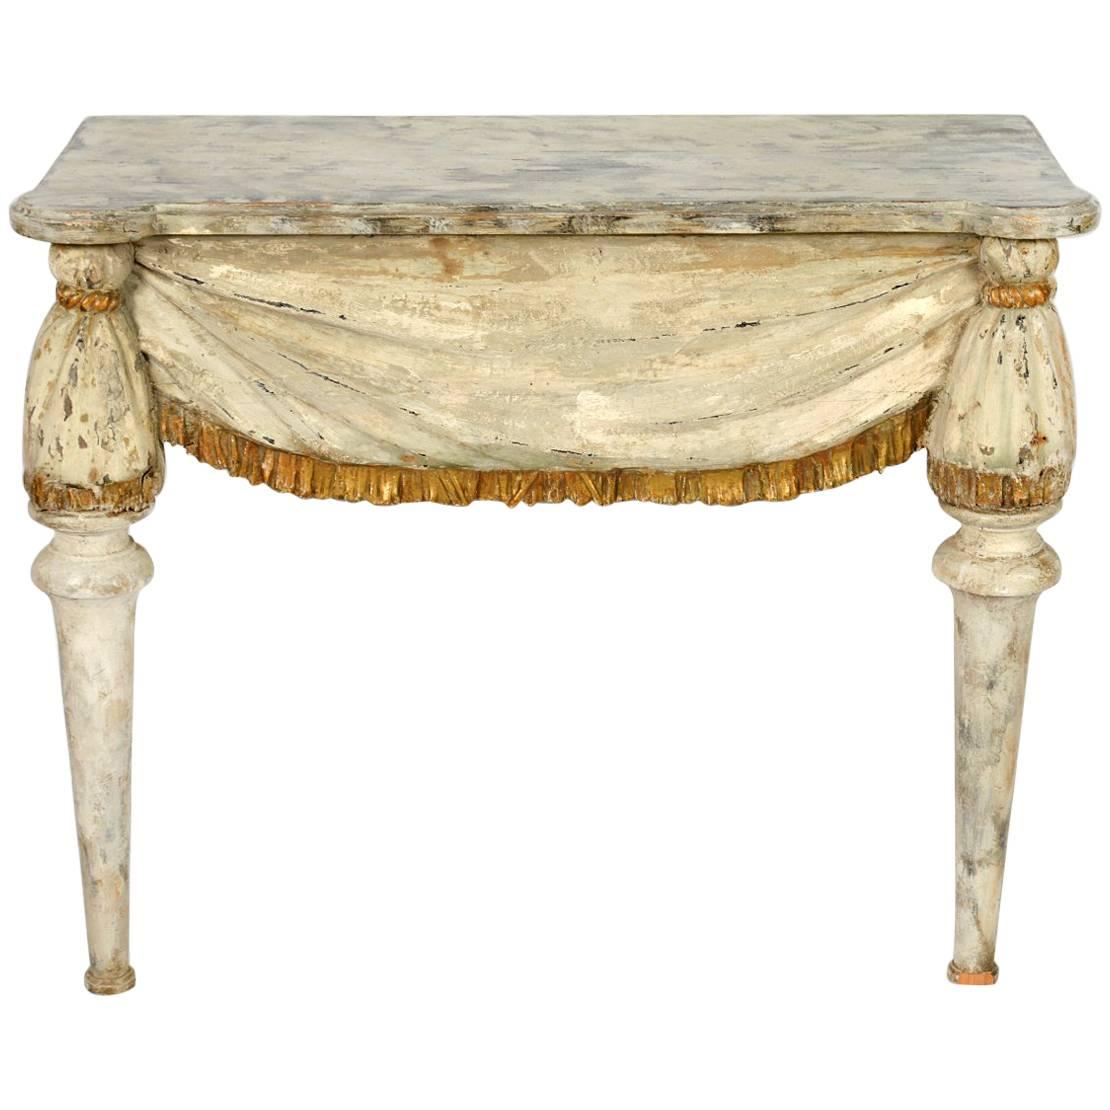 19th Century Italian Carved Wood Console with Faux Marbleized Painted Top